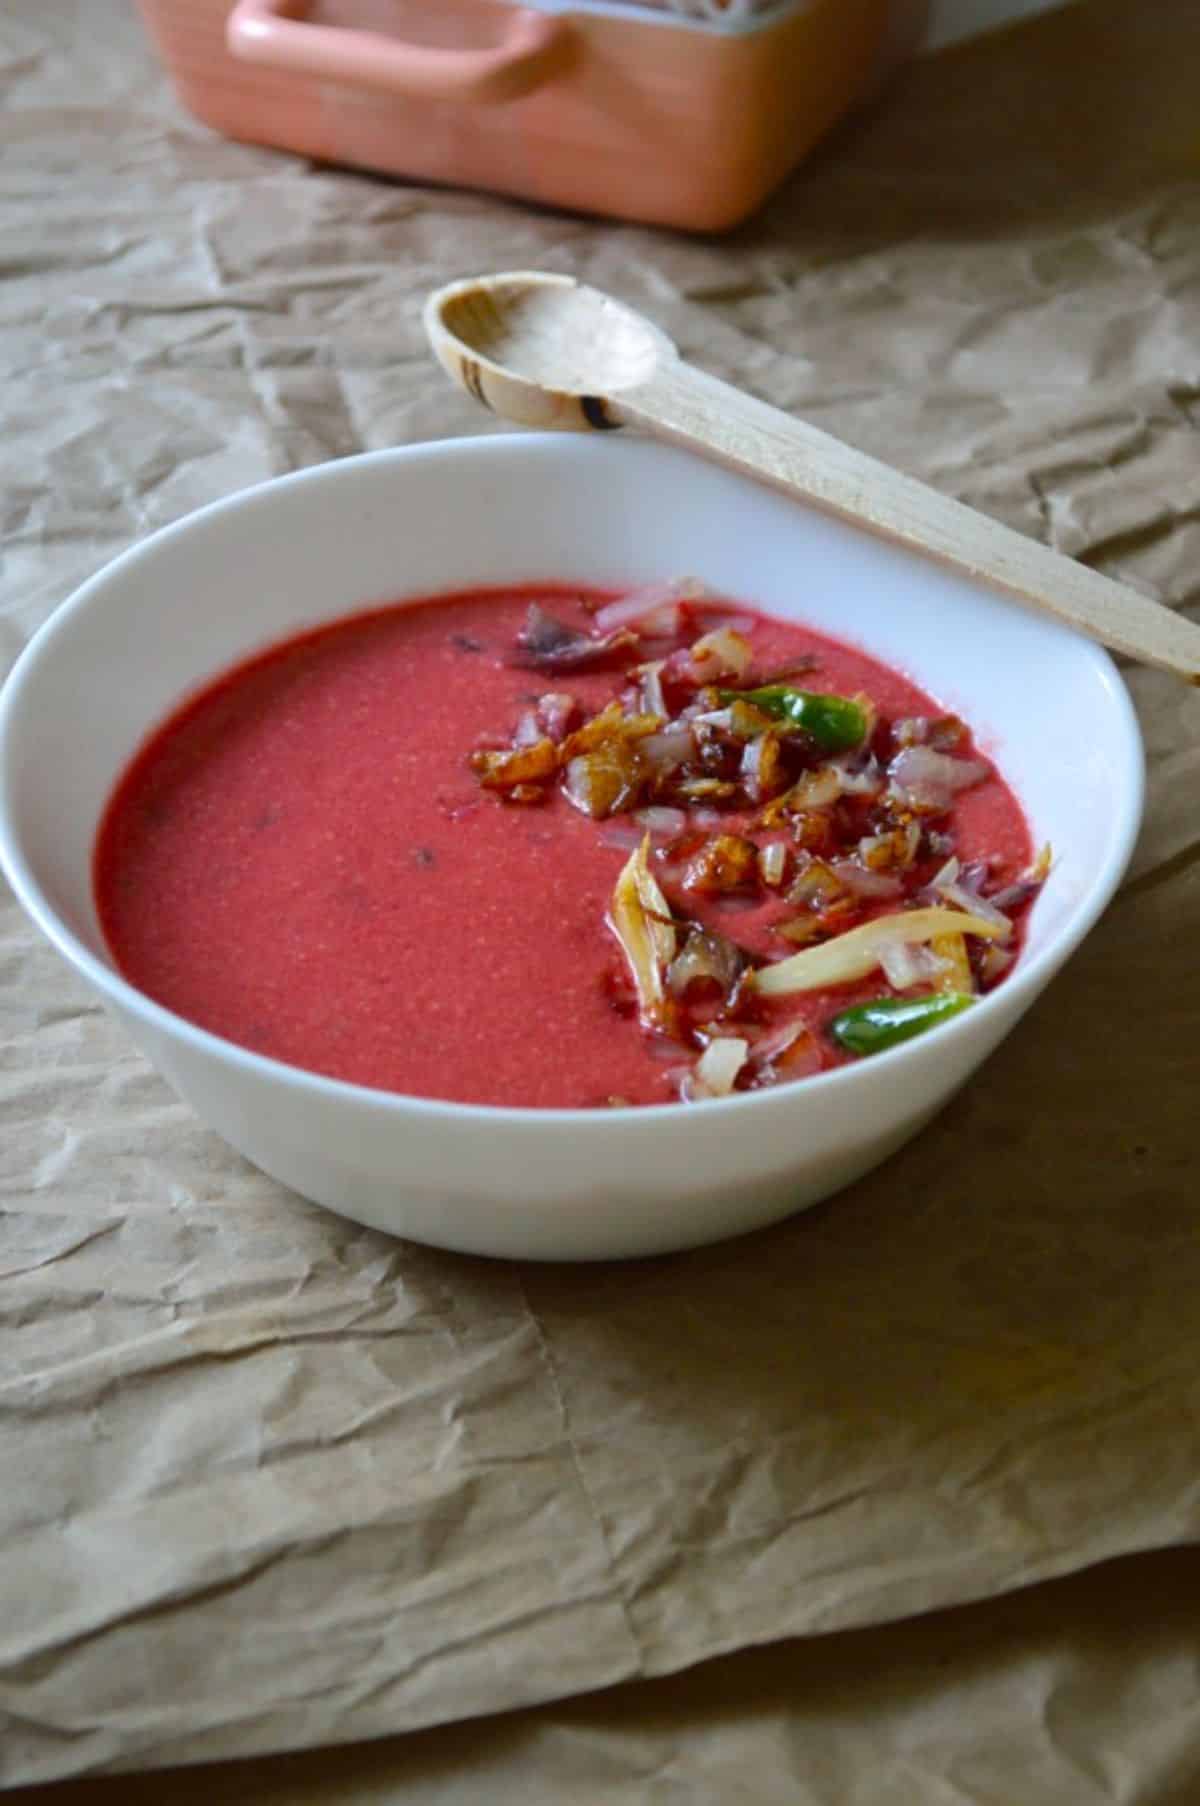 Beetroot Kadhi dish in a white bowl with a wooden spoon.